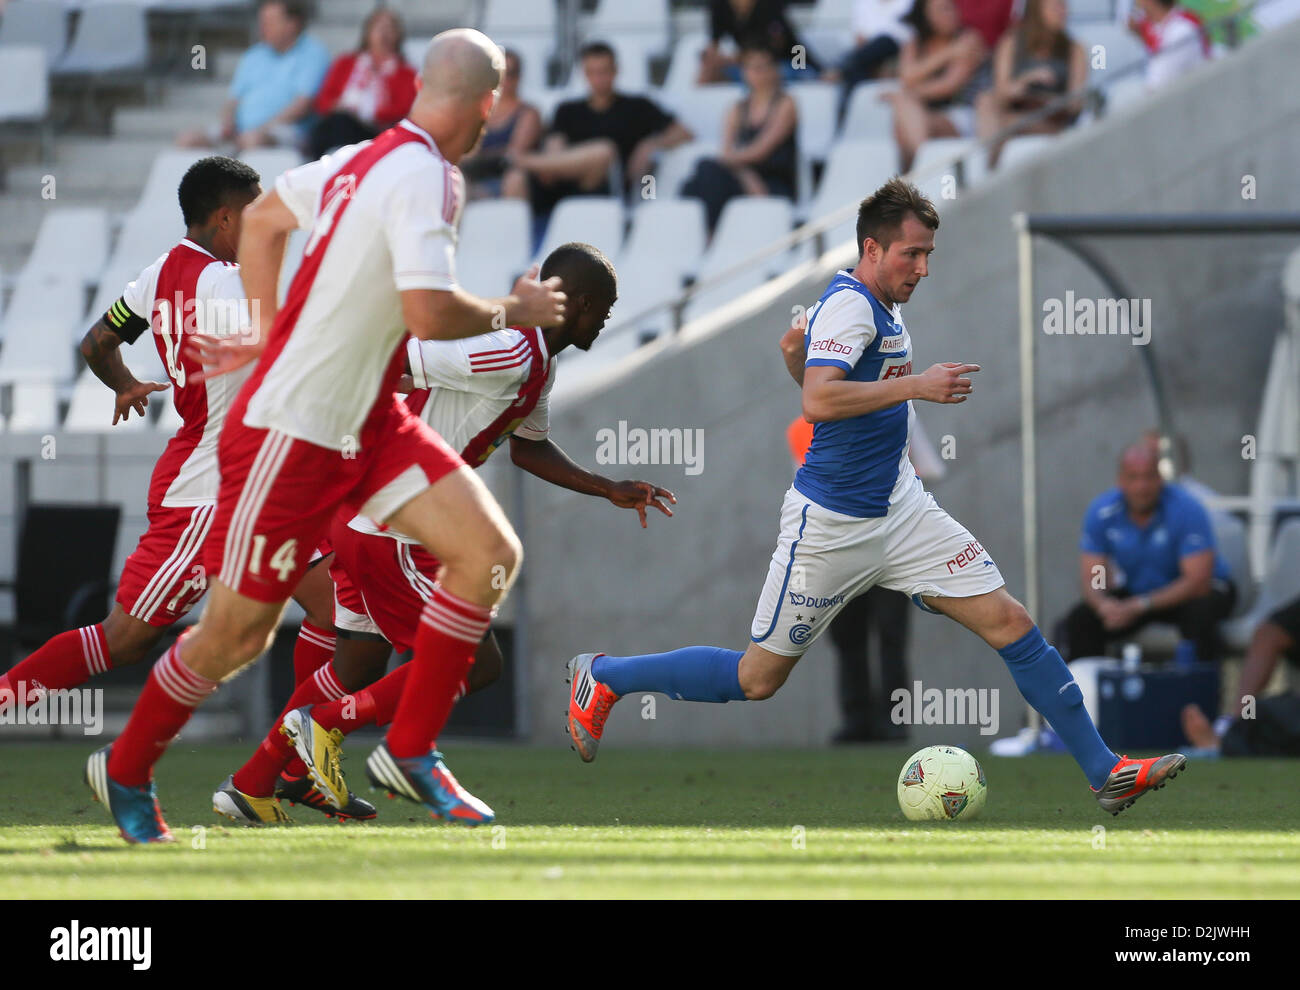 CAPE TOWN, South Africa - Saturday 26 January 2013, Izet Hajrovic of Grasshopper Club Zurich during the soccer/football match Grasshopper Club Zurich (Switzerland) and Ajax Cape Town at the Cape Town stadium. Photo by Roger Sedres/ImageSA/ Alamy Live News Stock Photo